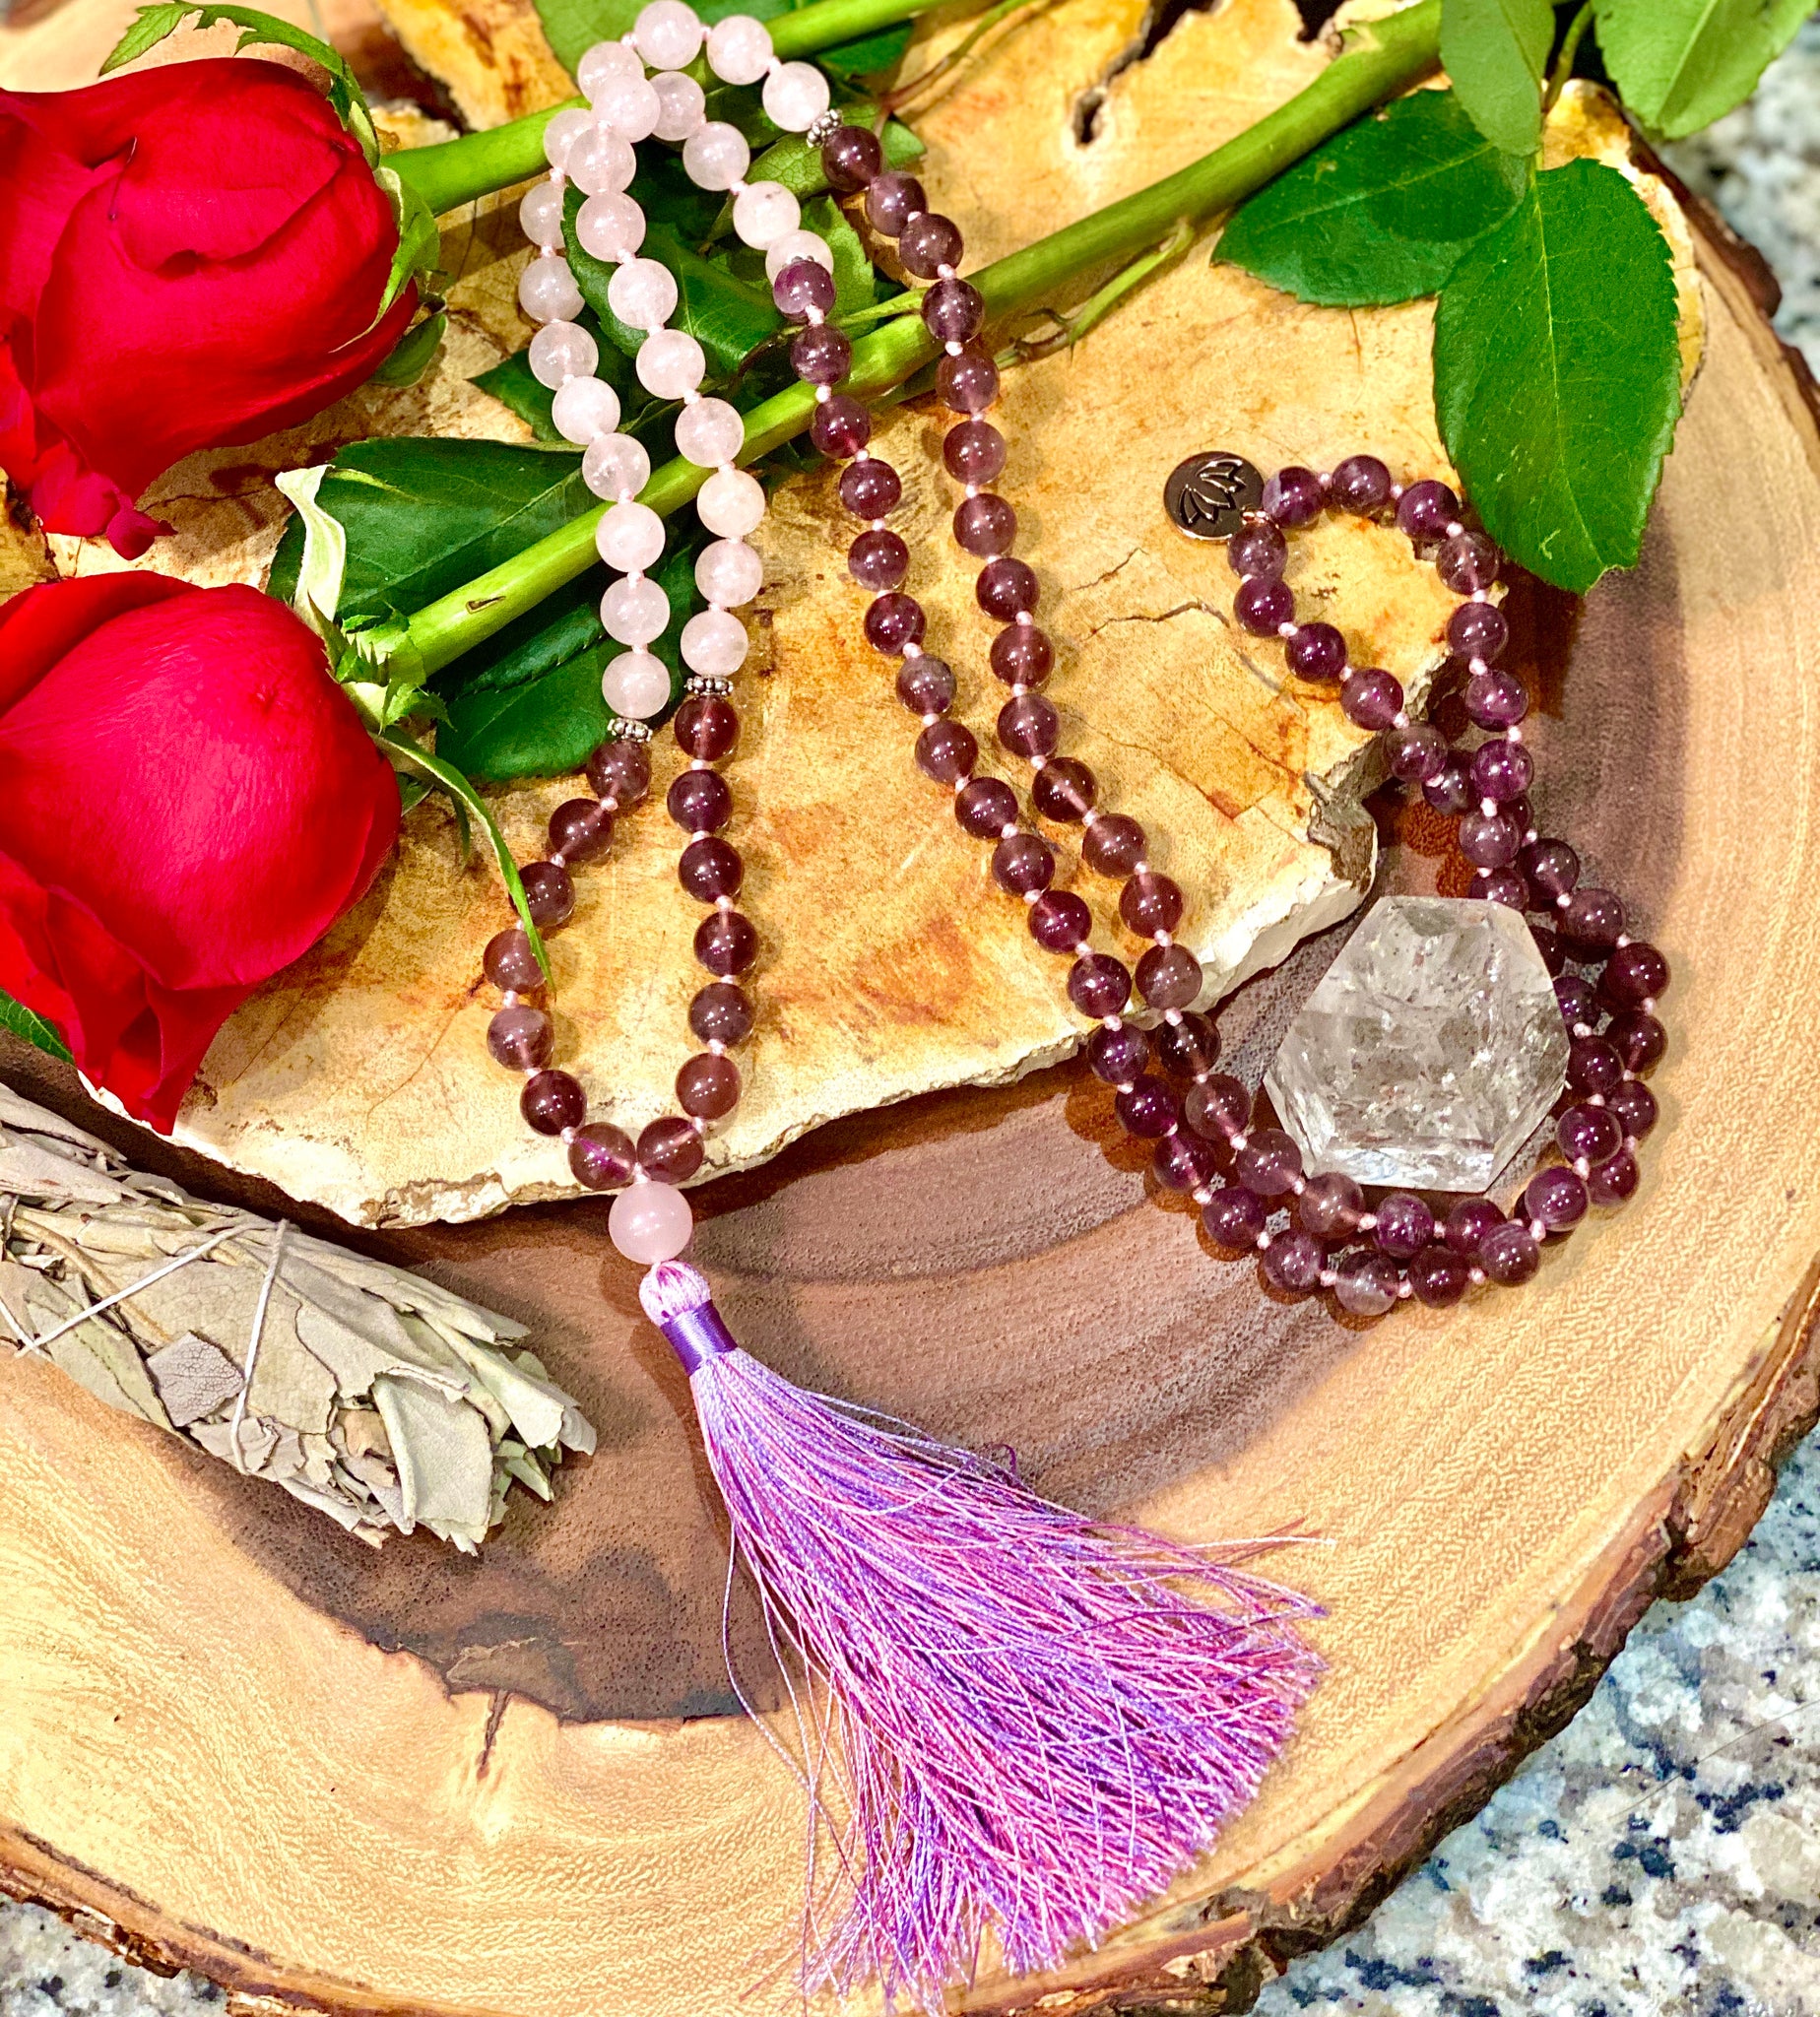 Unconditional Love - Hand-Knotted 108 Mala Beads Necklace, Rhodonite, Rose  Quartz, & Howlite